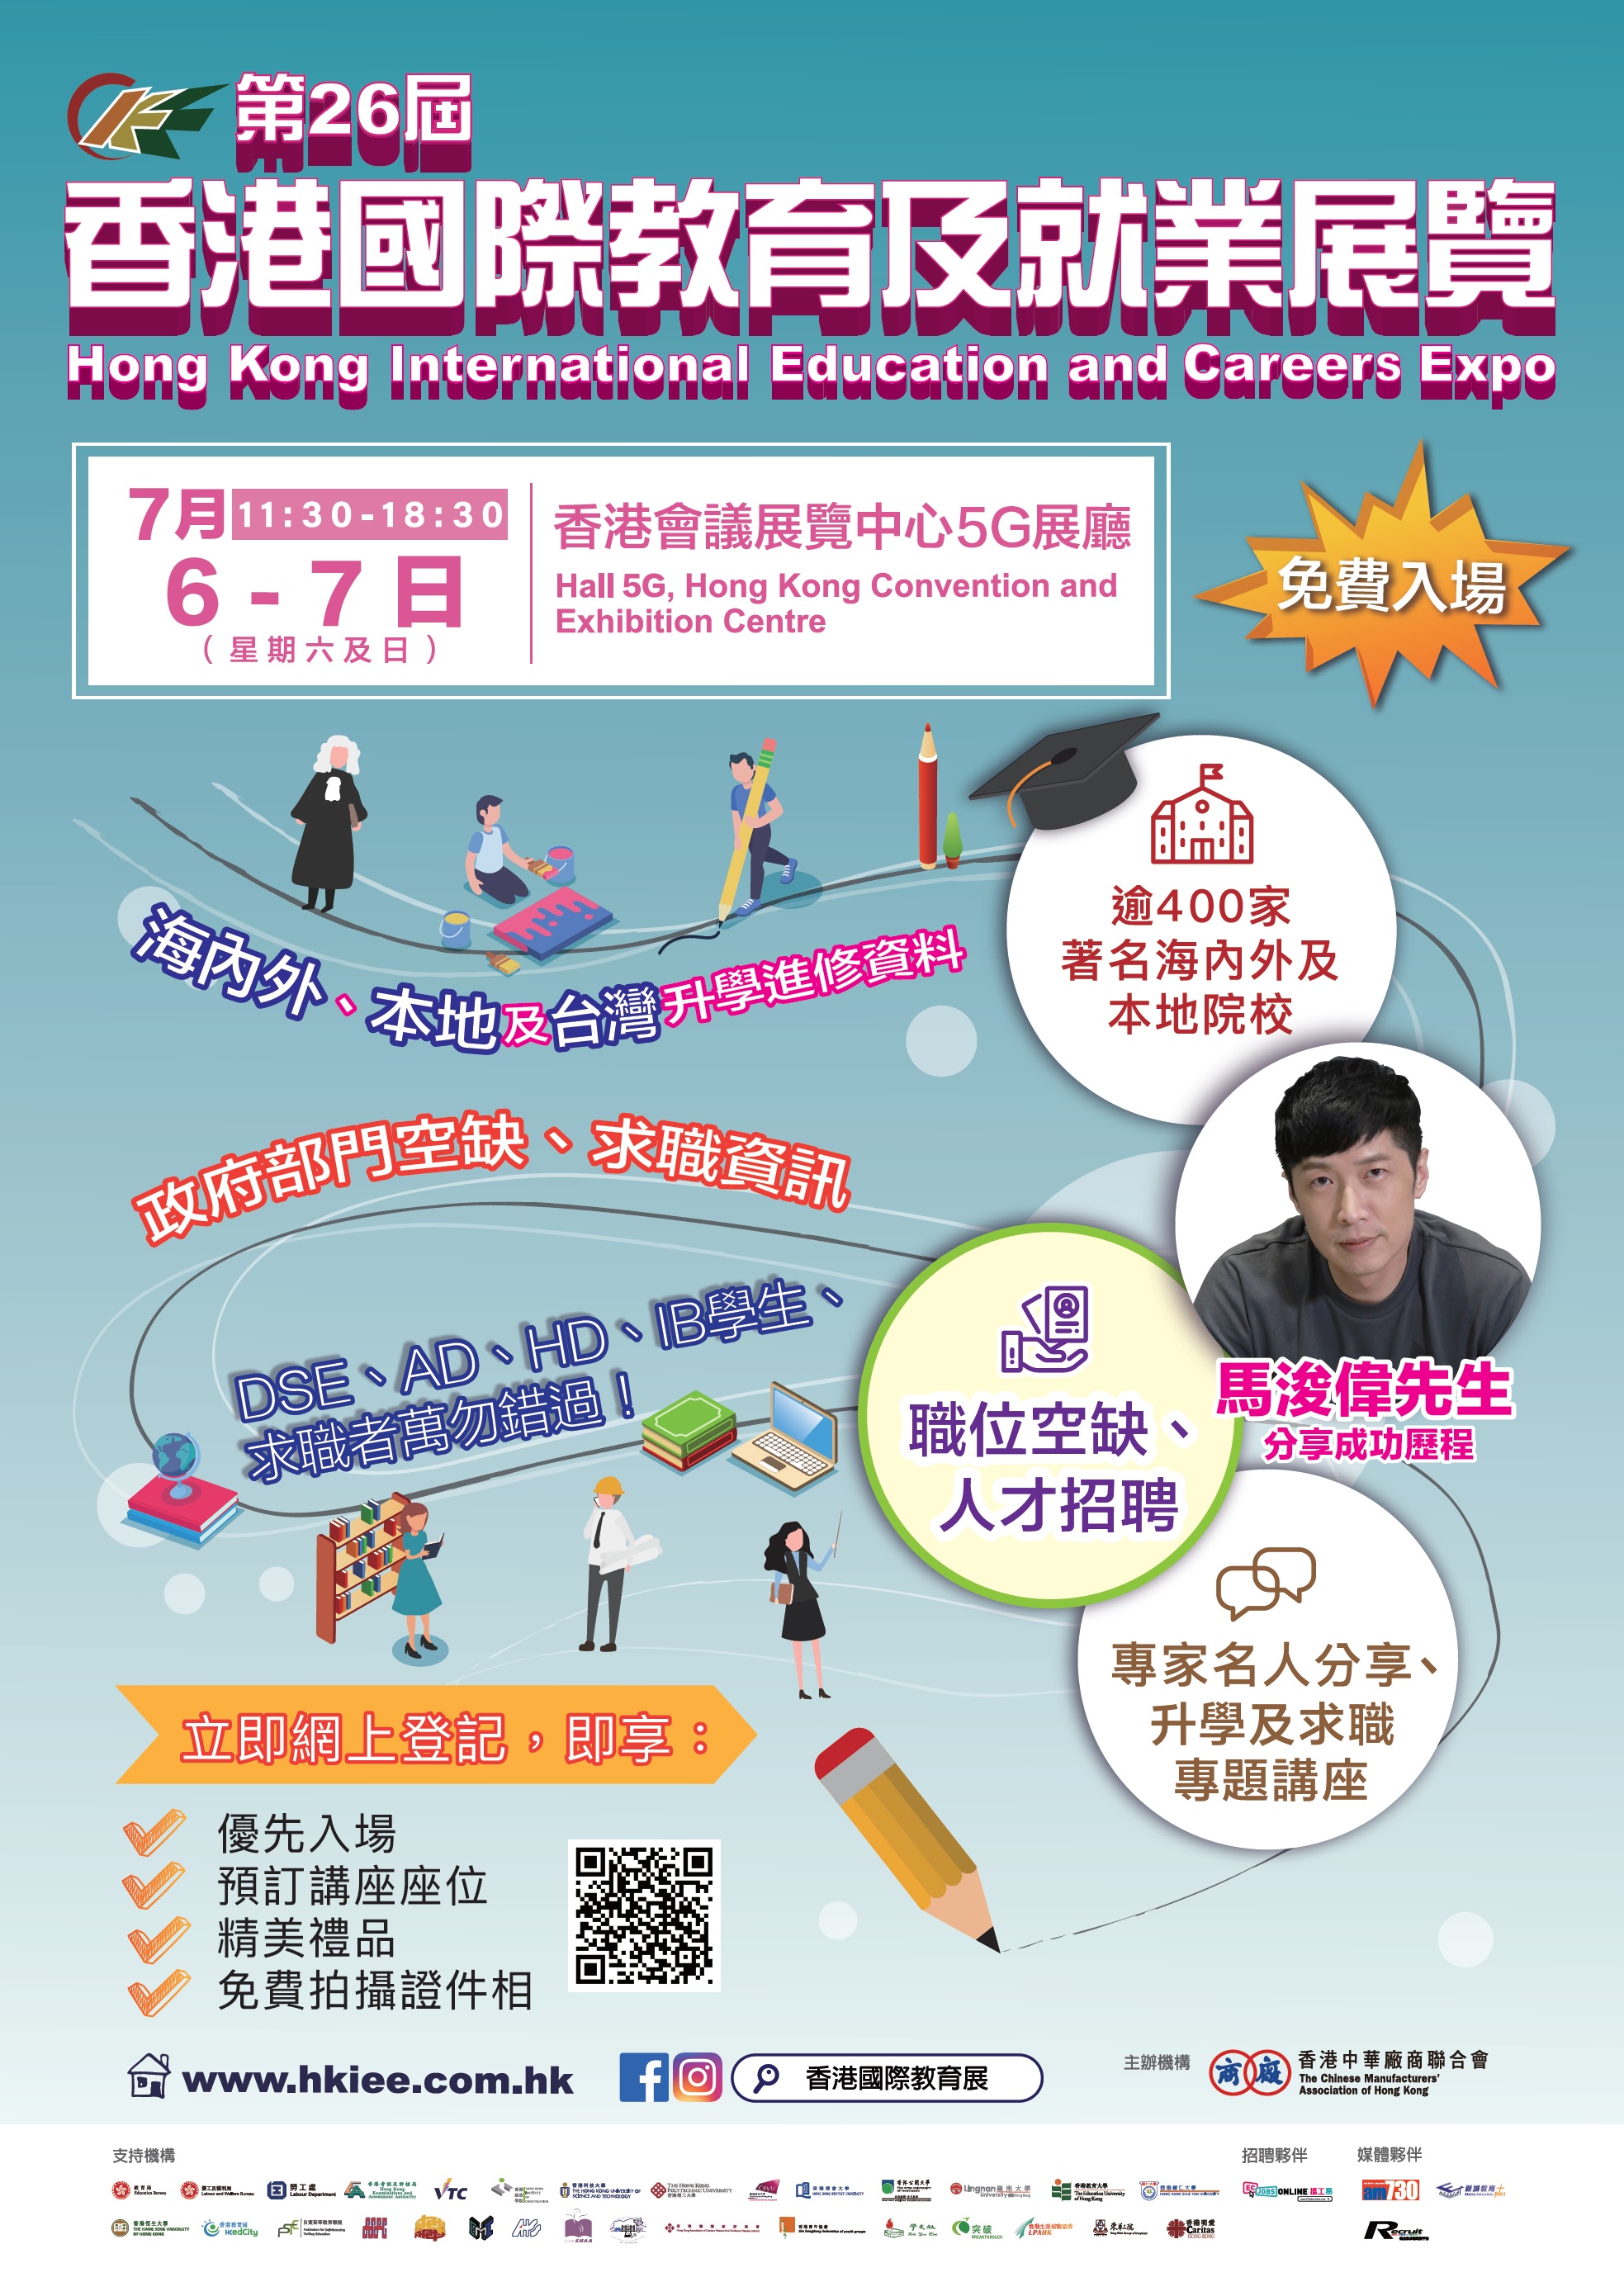 The 26th Hong Kong International Education and Careers Expo